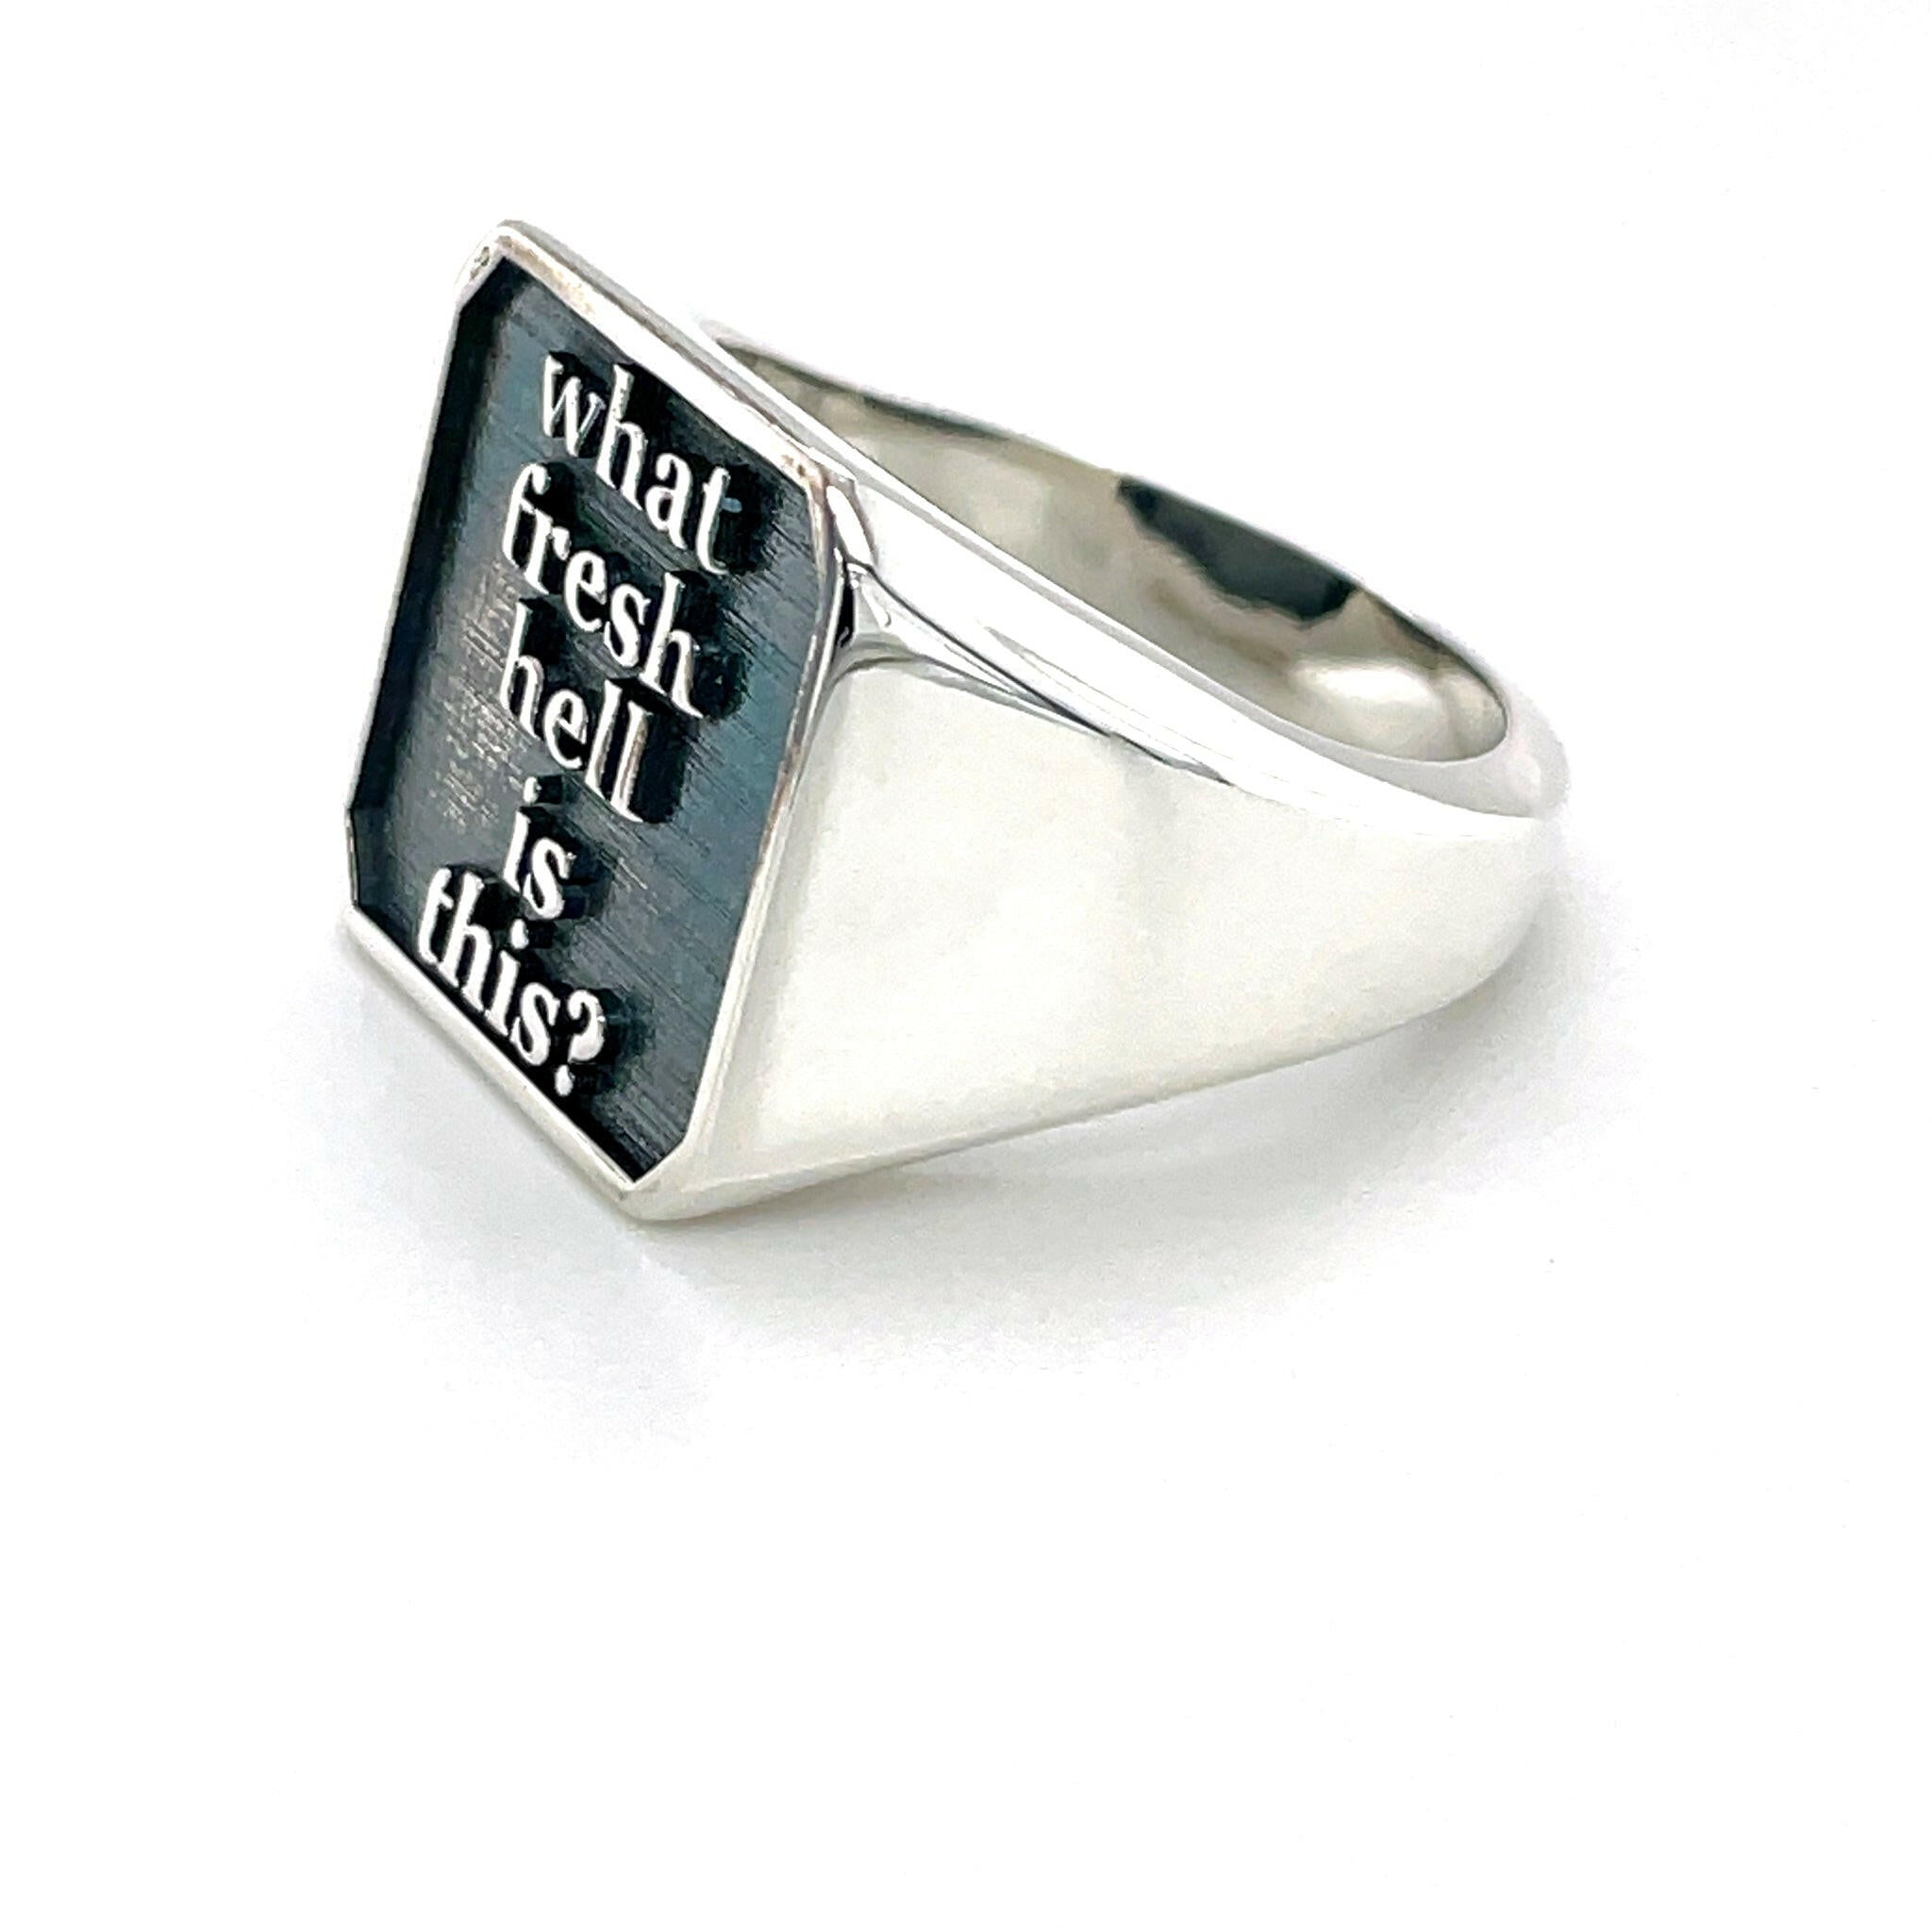 What Fresh Hell Is This?(Salty) - Ilah Cibis Jewelry-Rings